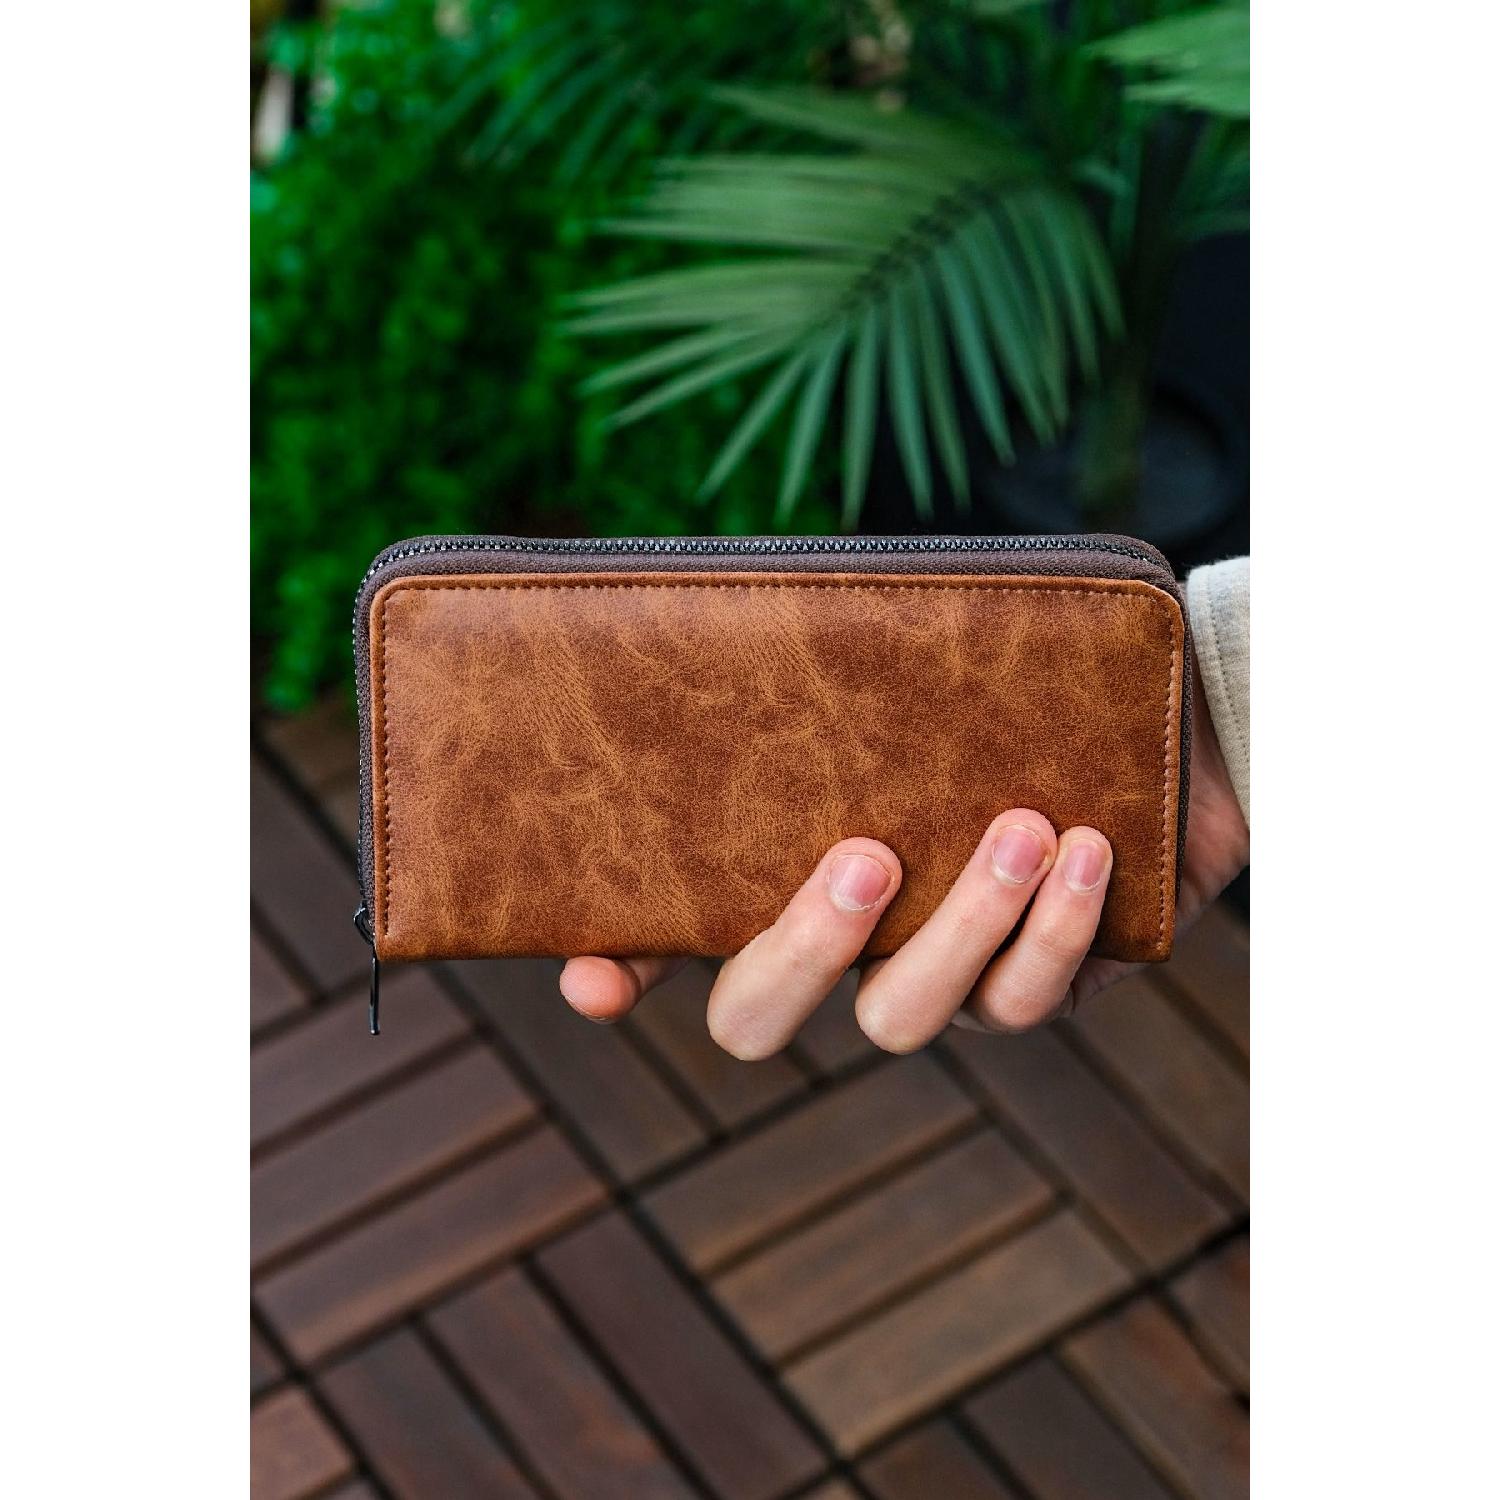 Santra Sports Wear Unisex Leather Portfolio Card Holder Long Wallet With Phone Compartment Crazy Brown